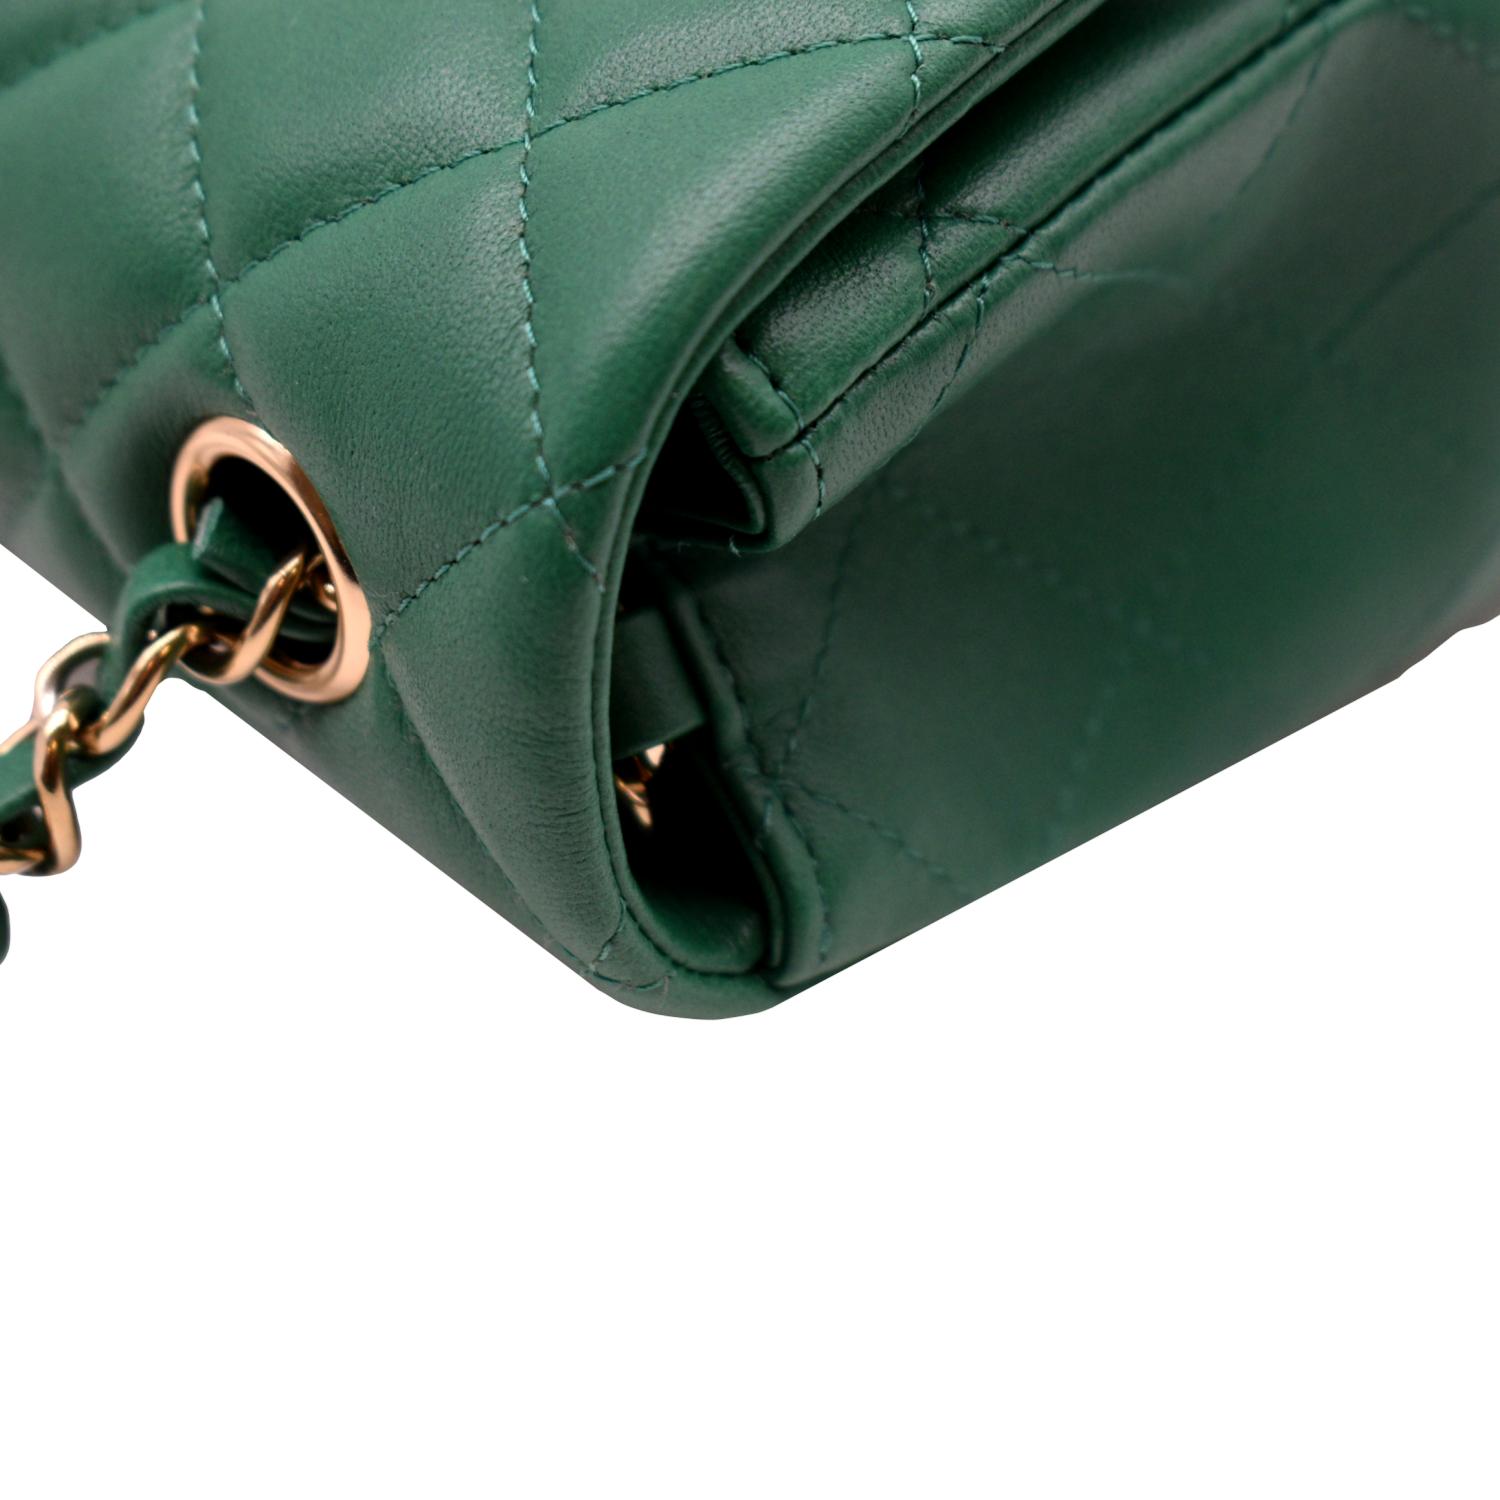 CHANEL Mini Rectangular Flap Quilted Leather Crossbody Bag Green